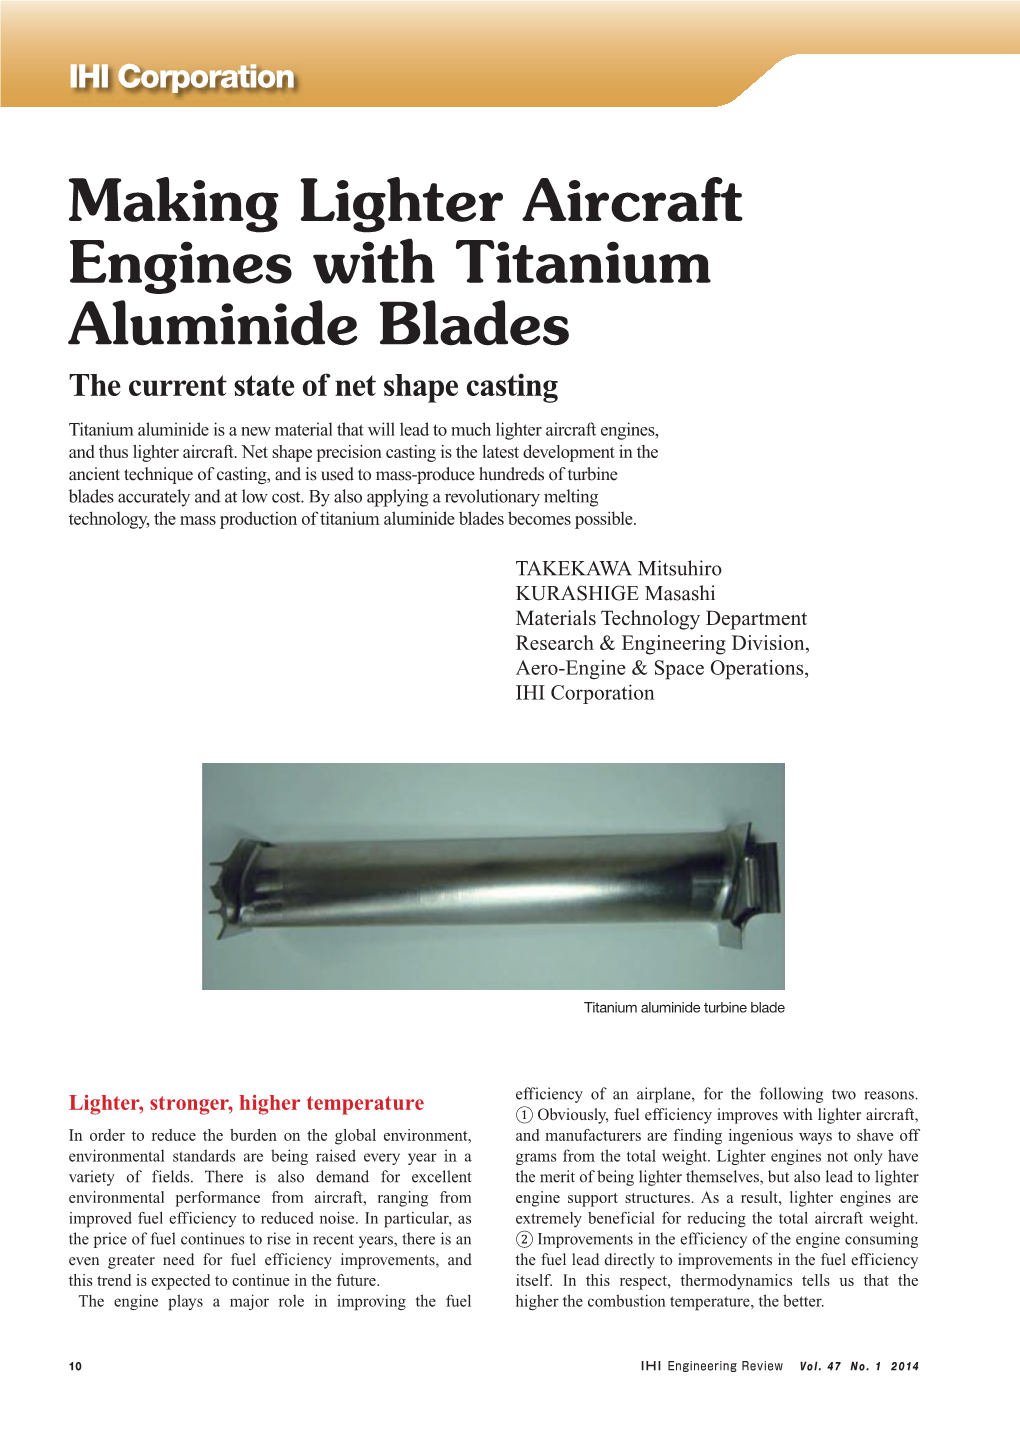 Making Lighter Aircraft Engines with Titanium Aluminide Blades